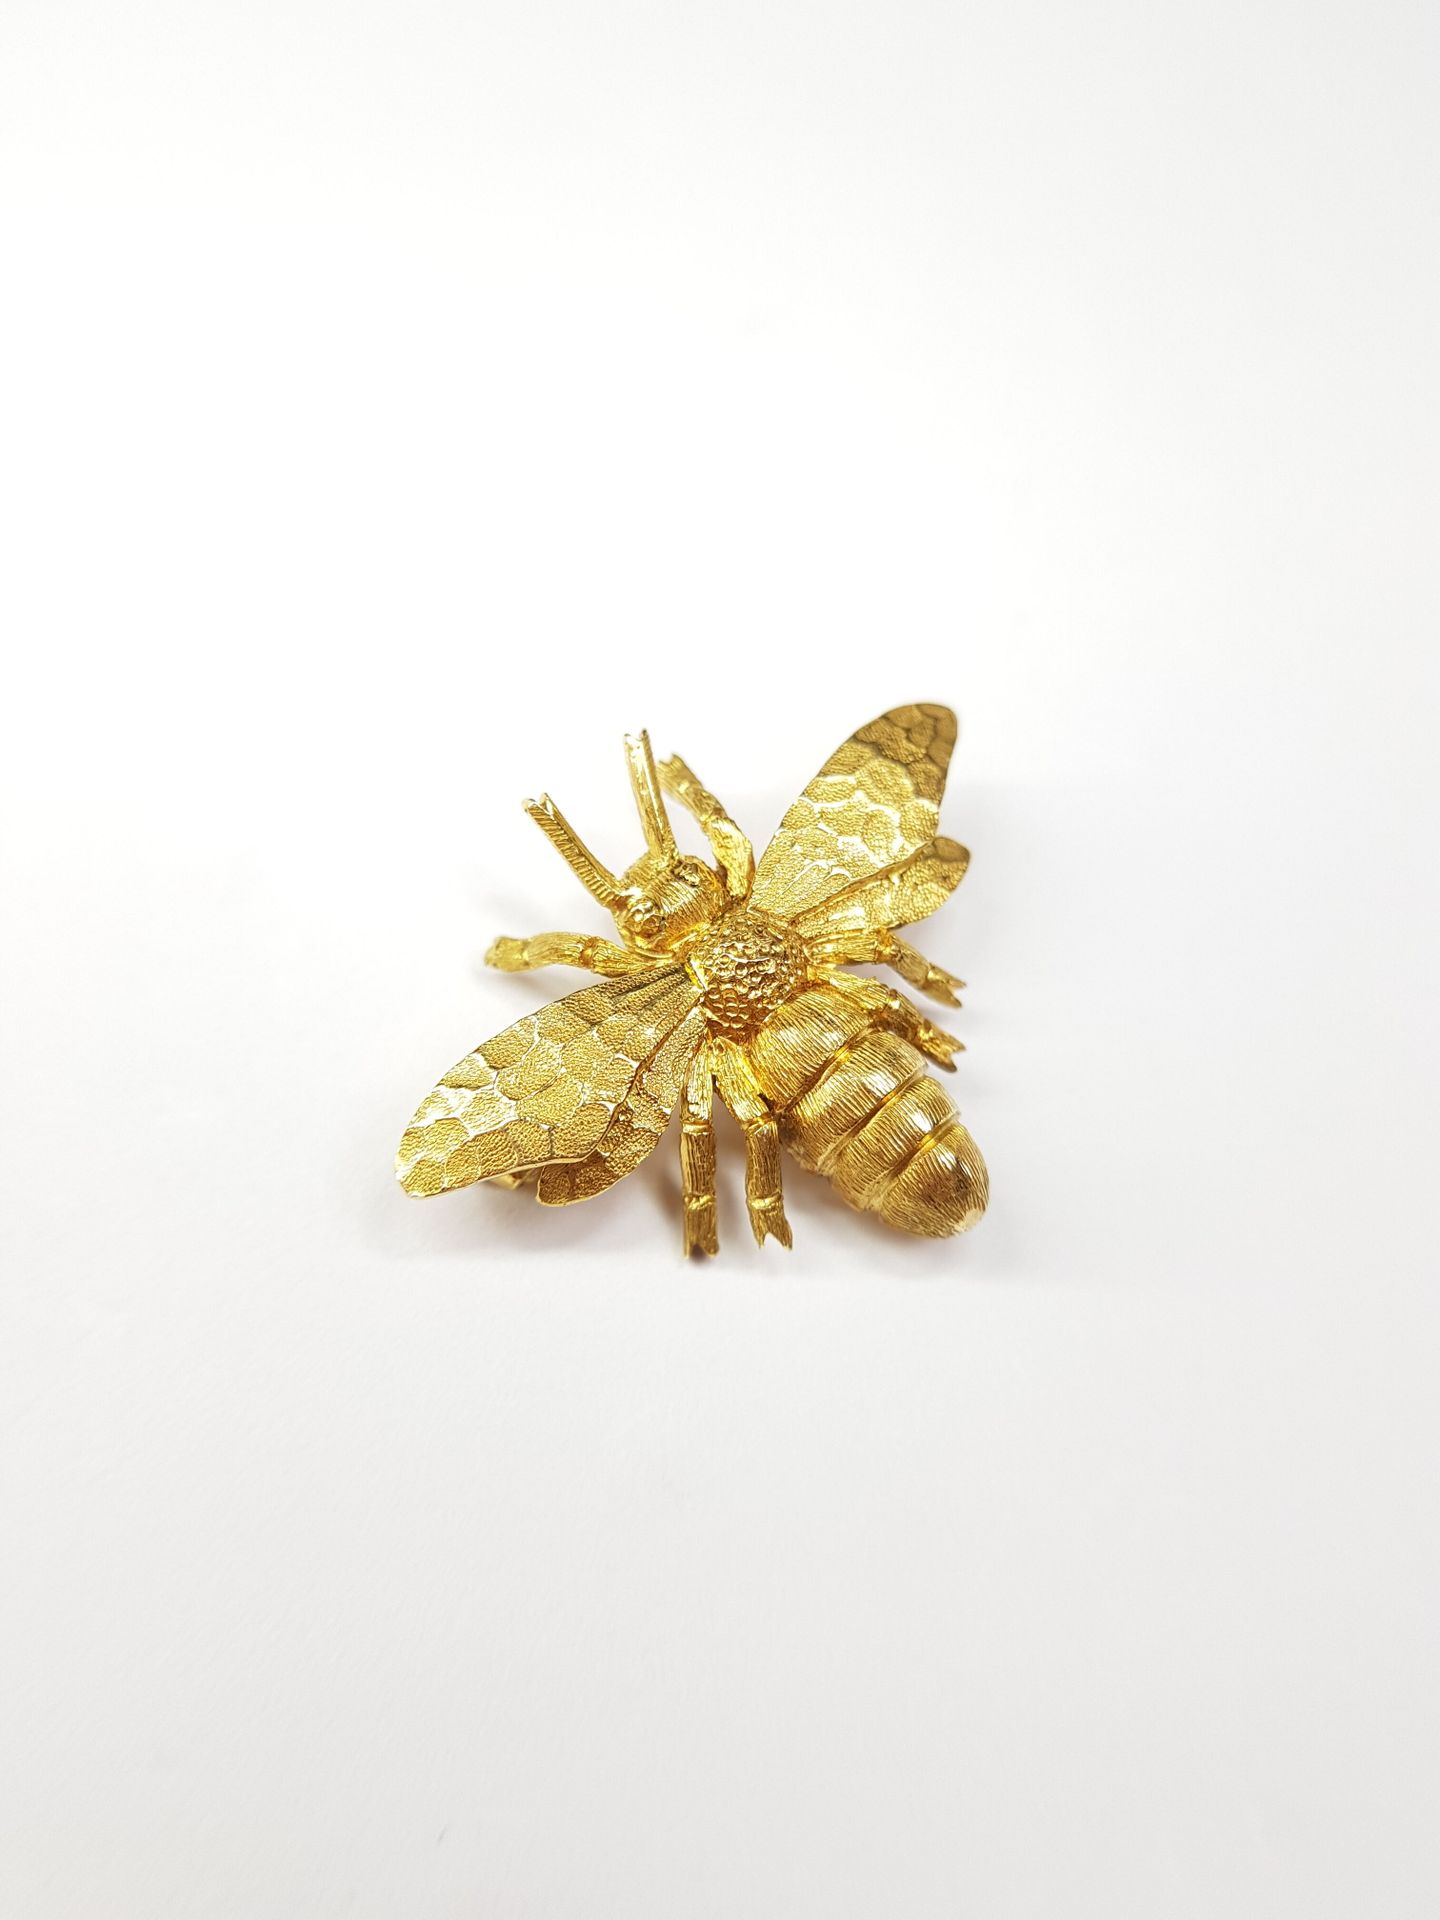 Null A gold 750 ‰ pin featuring a bee.

Weight : 6,53 g

Length : 2 cm